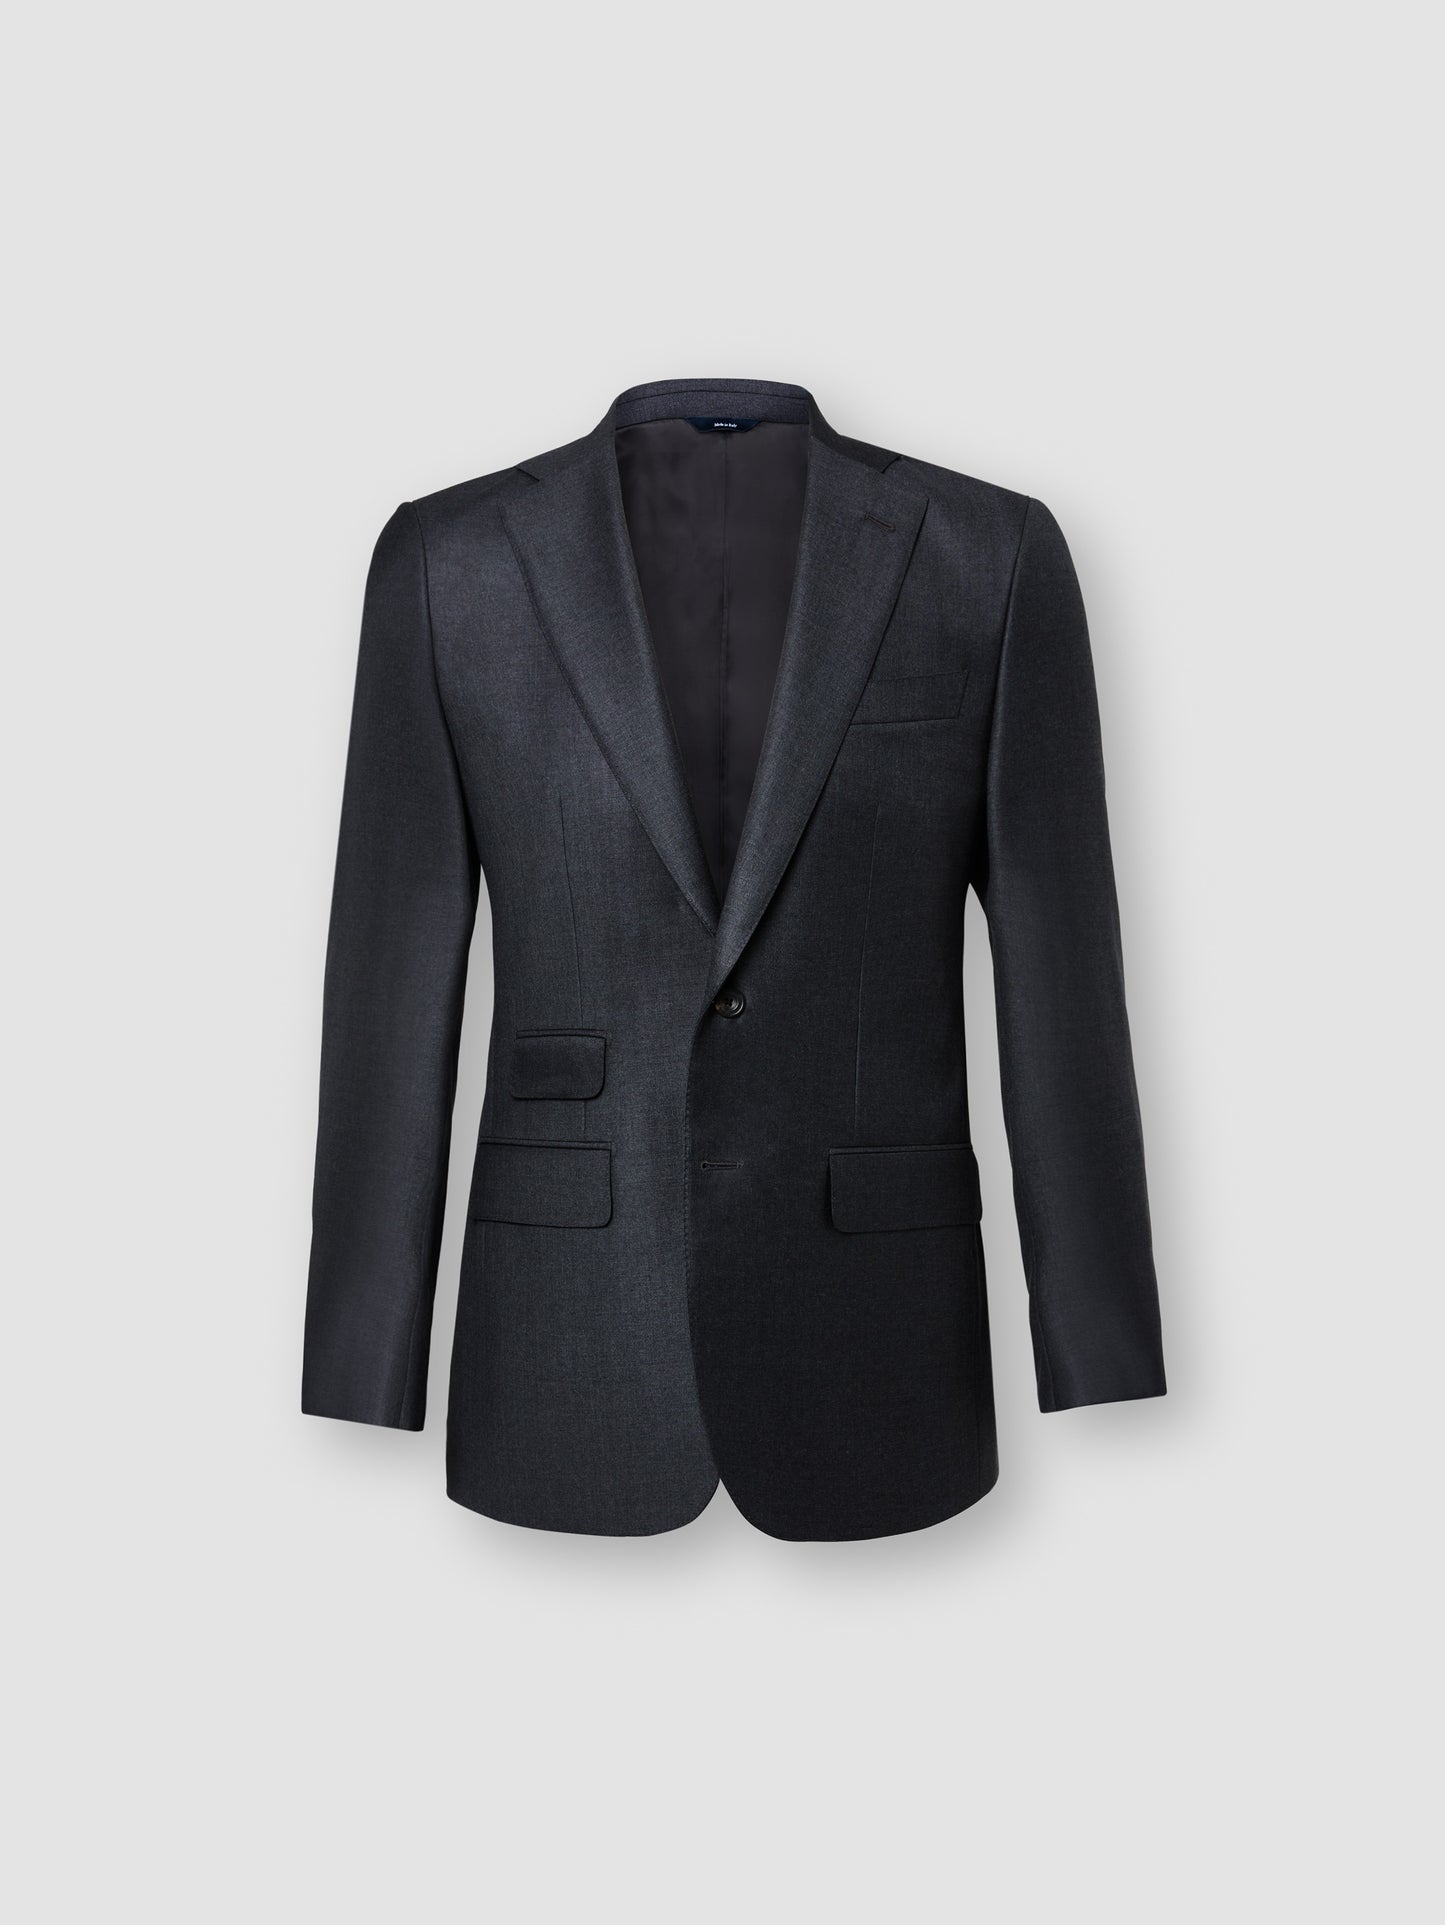 Single Breasted Wool Weighhouse Suit Grey Jacket Product Image